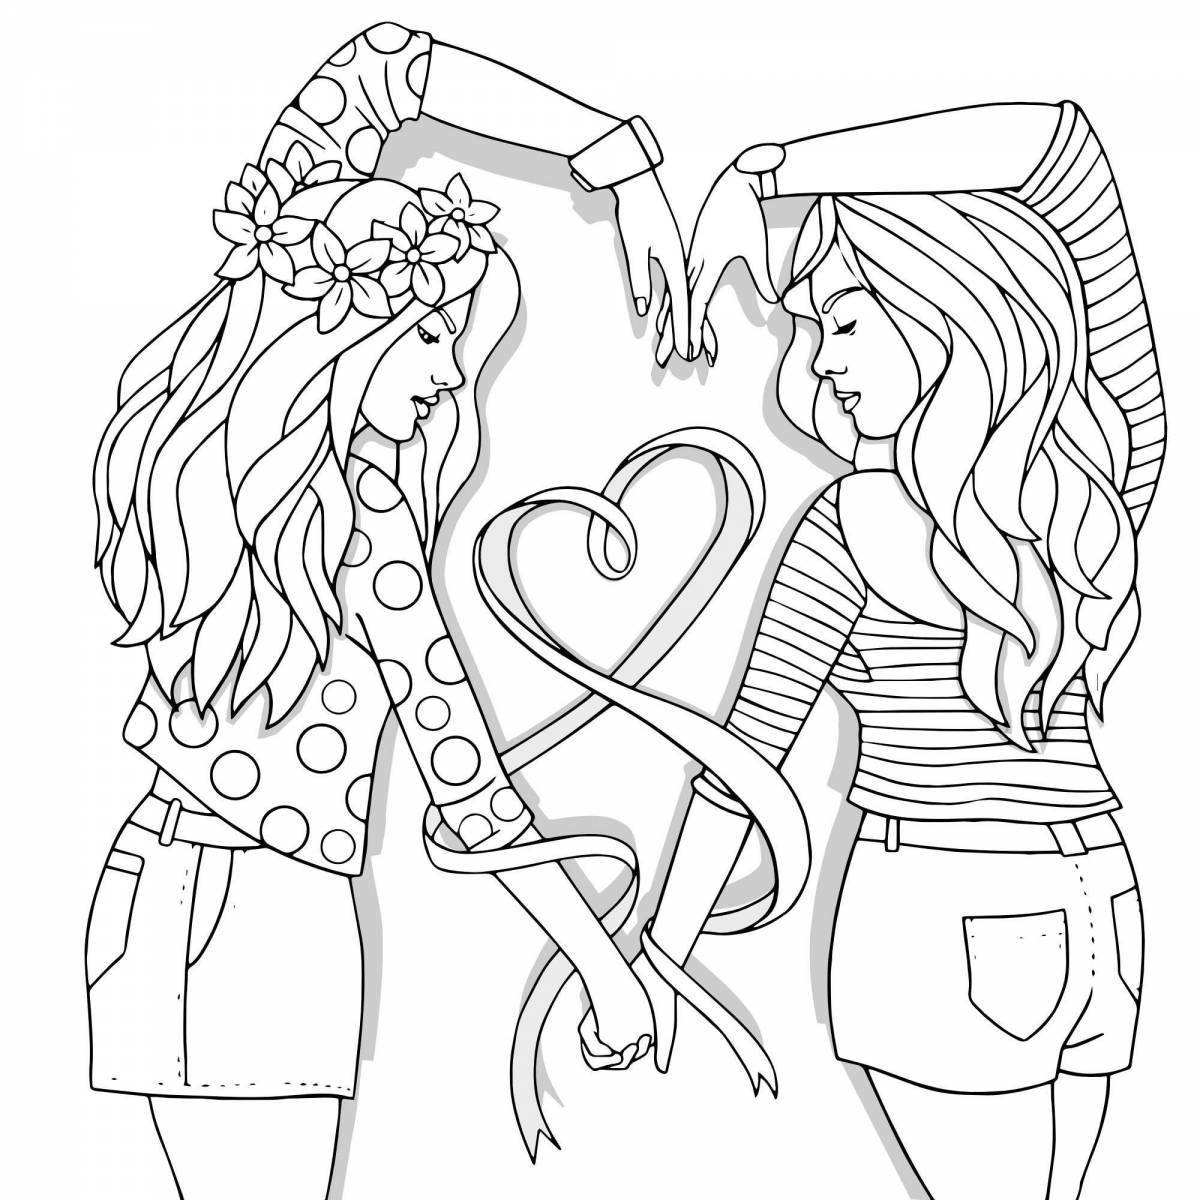 Exquisite coloring book for girls 2023